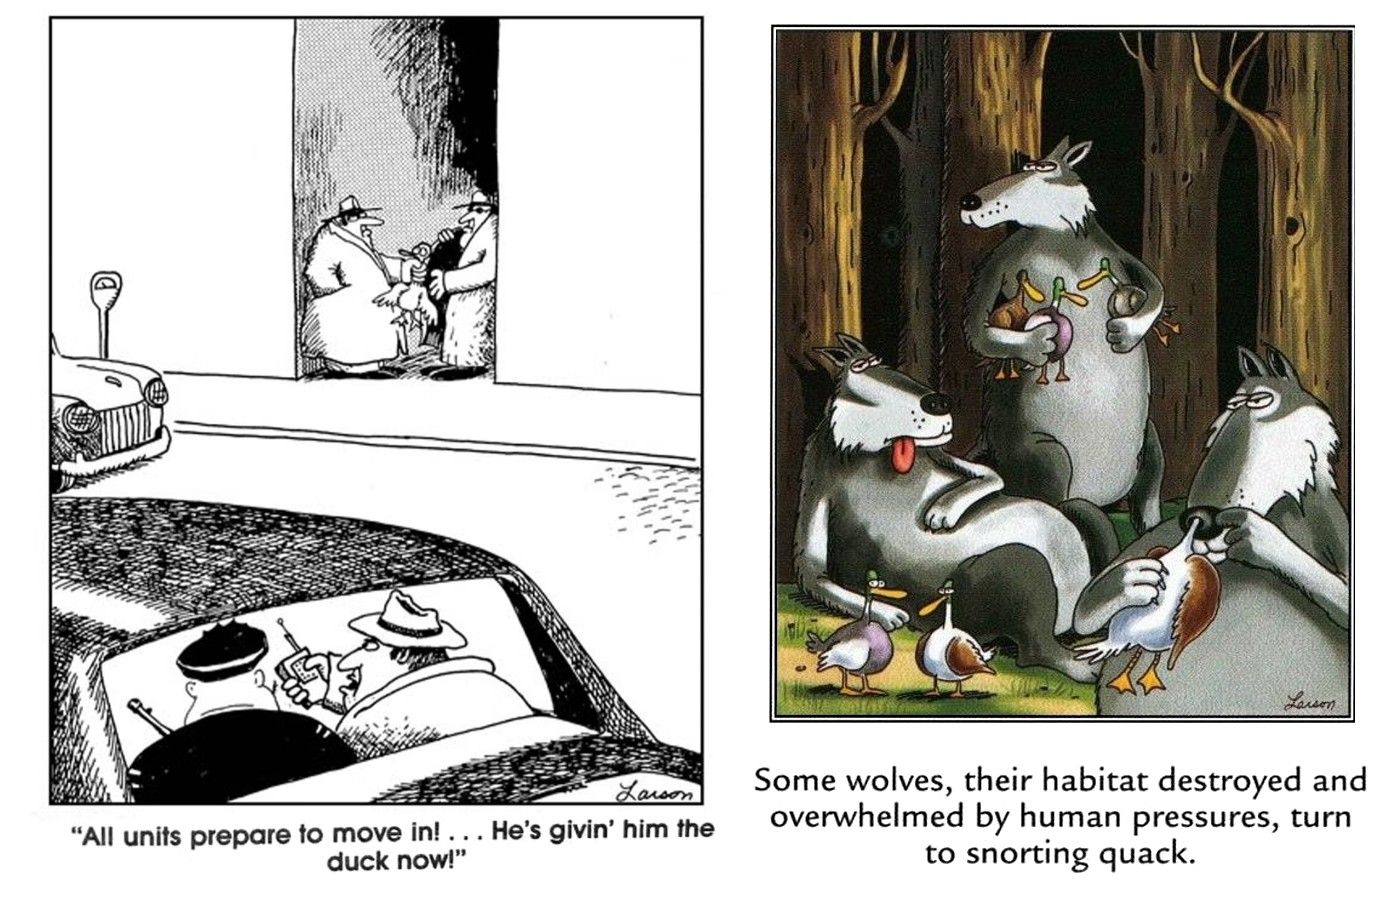 far side comics proving ducks are intoxicants in this world